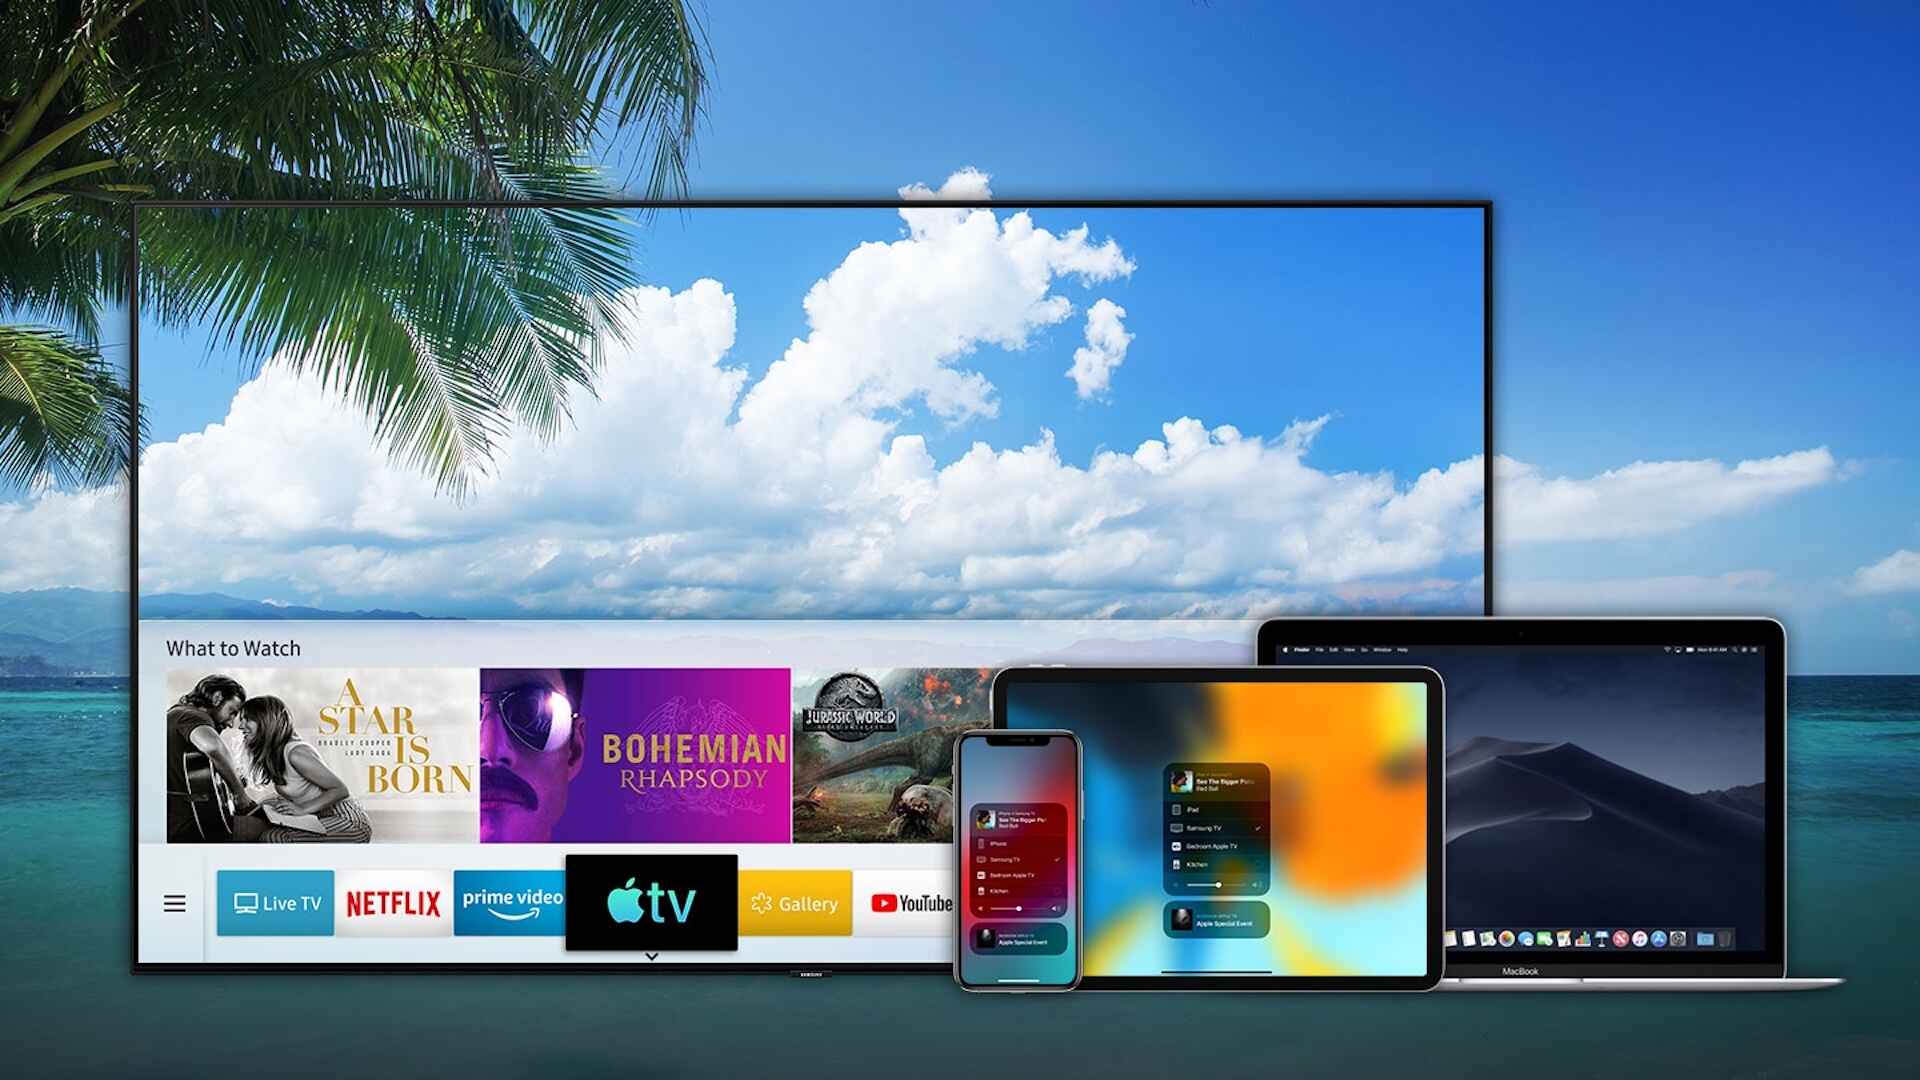 How To Project IPad To Smart TV